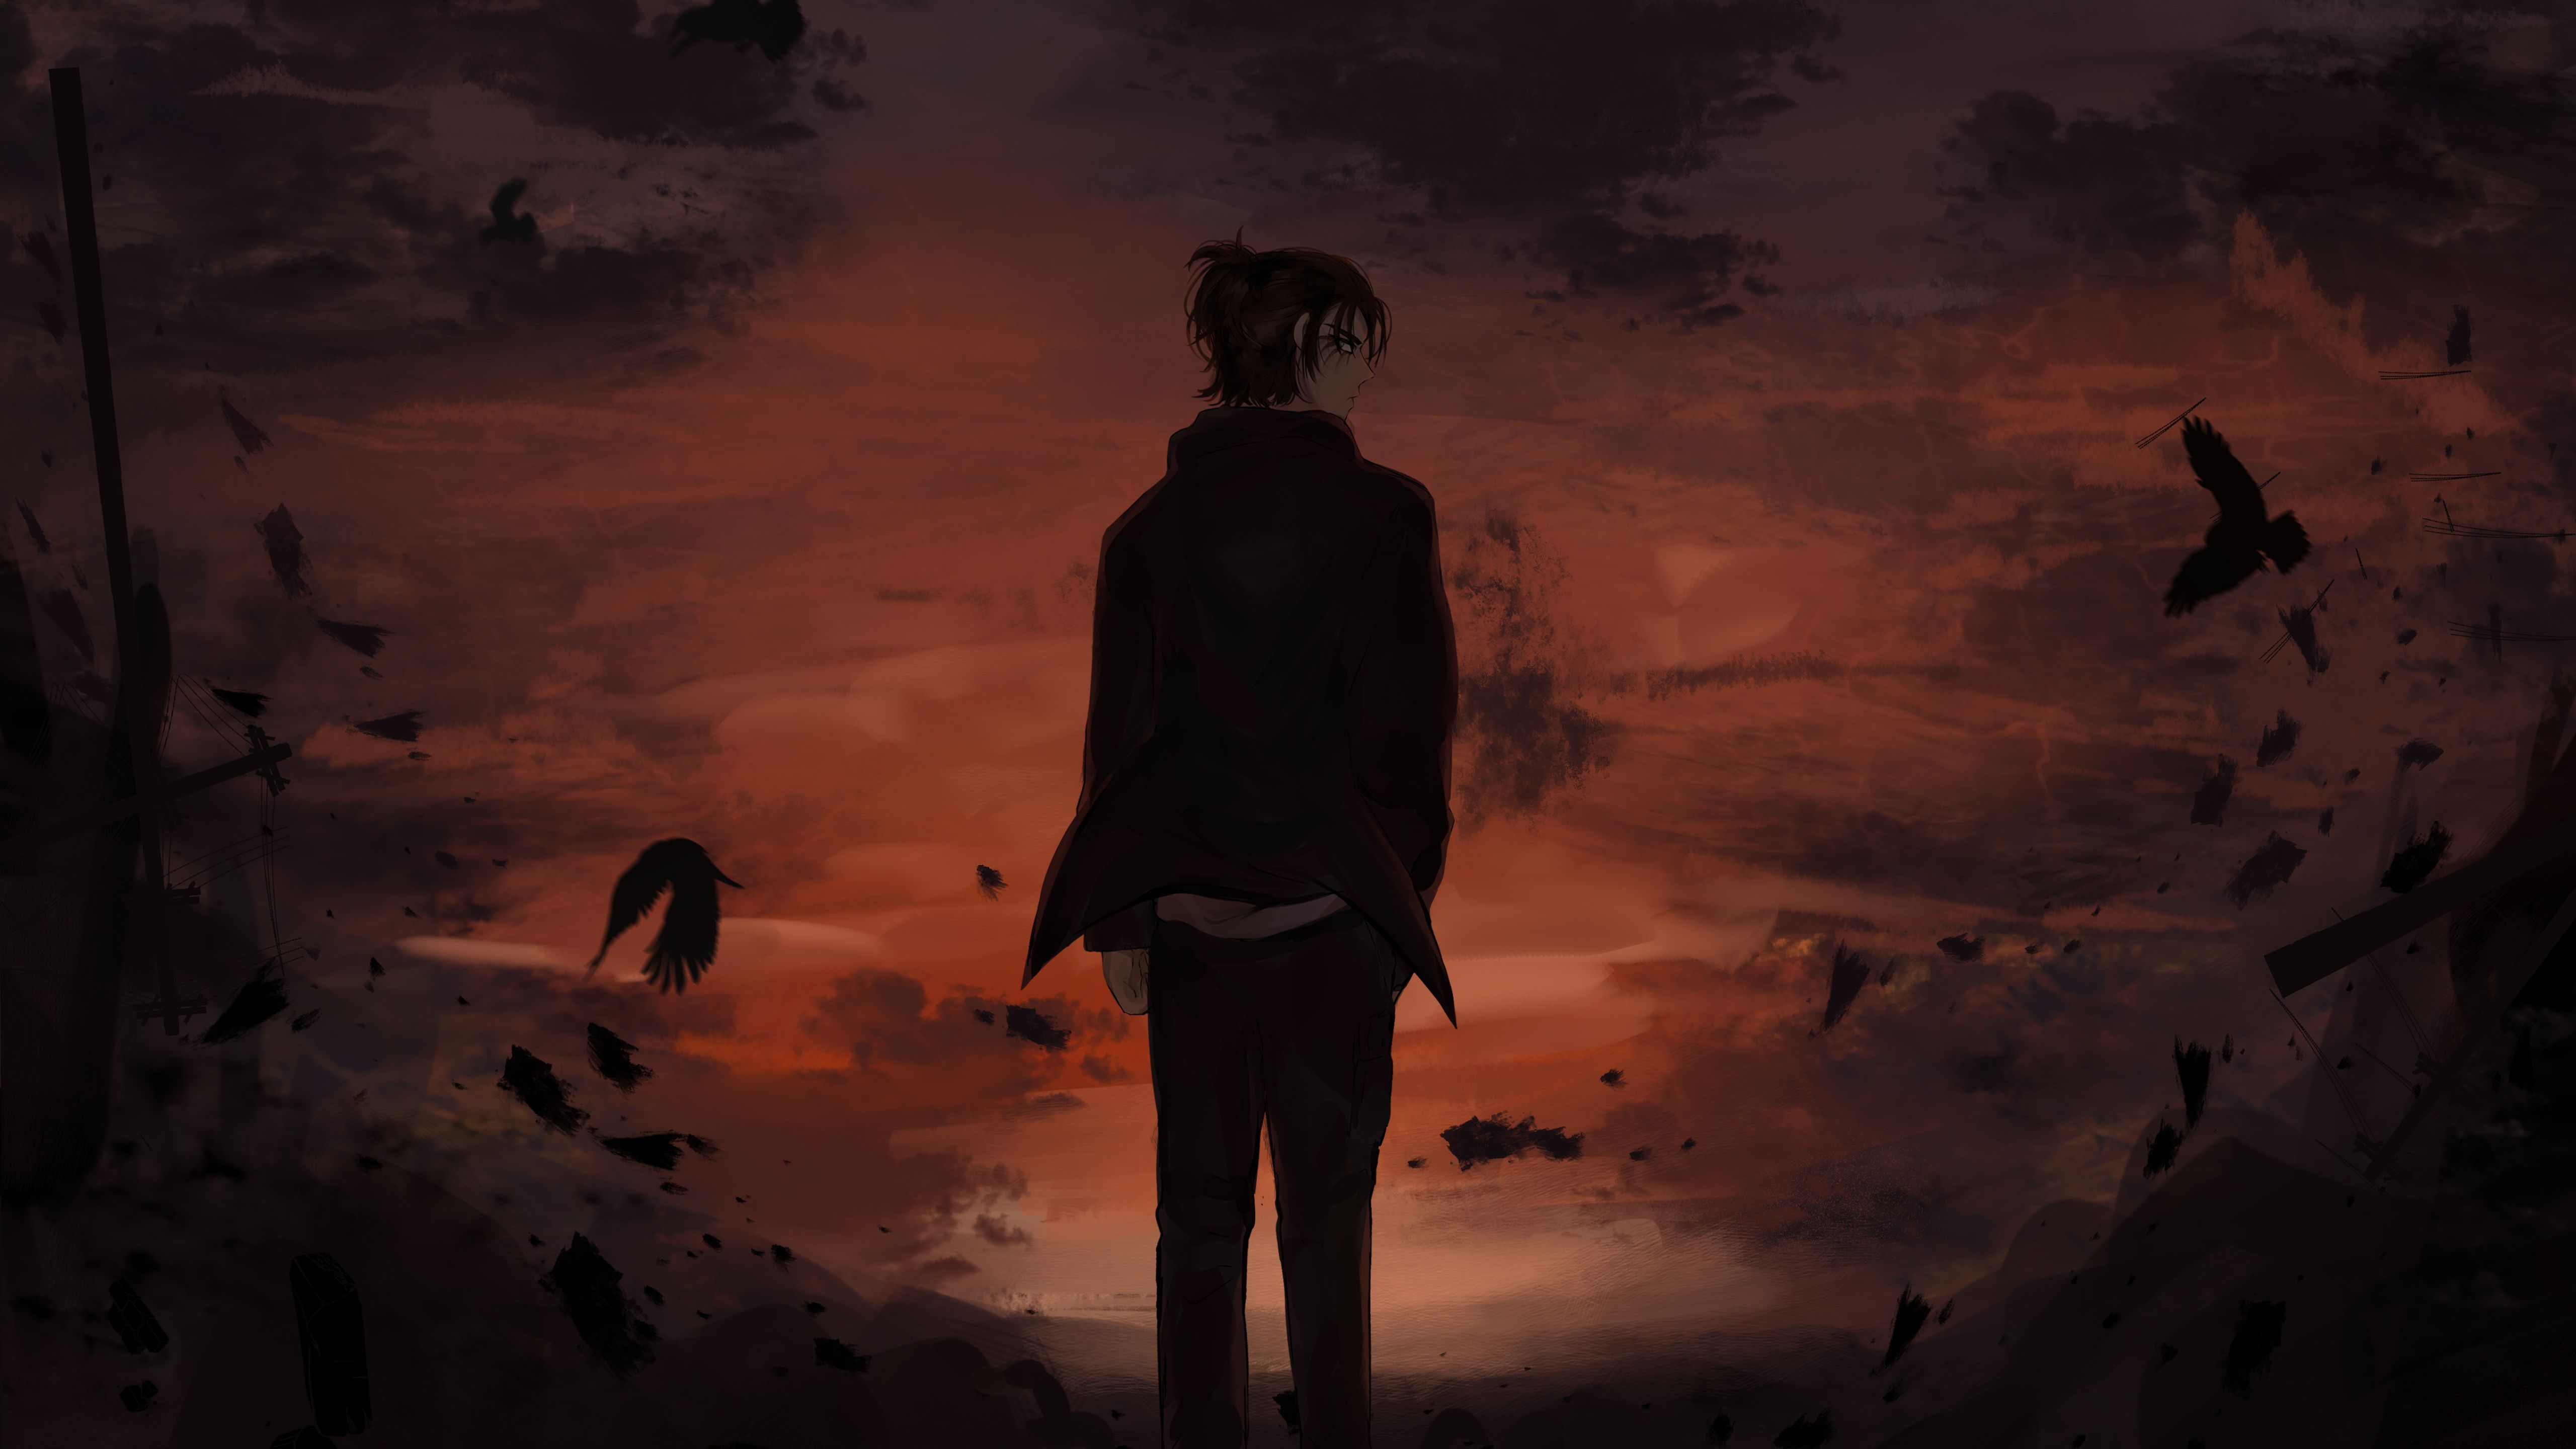 Eren Yeager Cool Attack On Titan 5K Wallpaper, HD Anime 4K Wallpaper, Image, Photo and Background Den. Attack on titan, Attack on titan eren, Attack on titan art